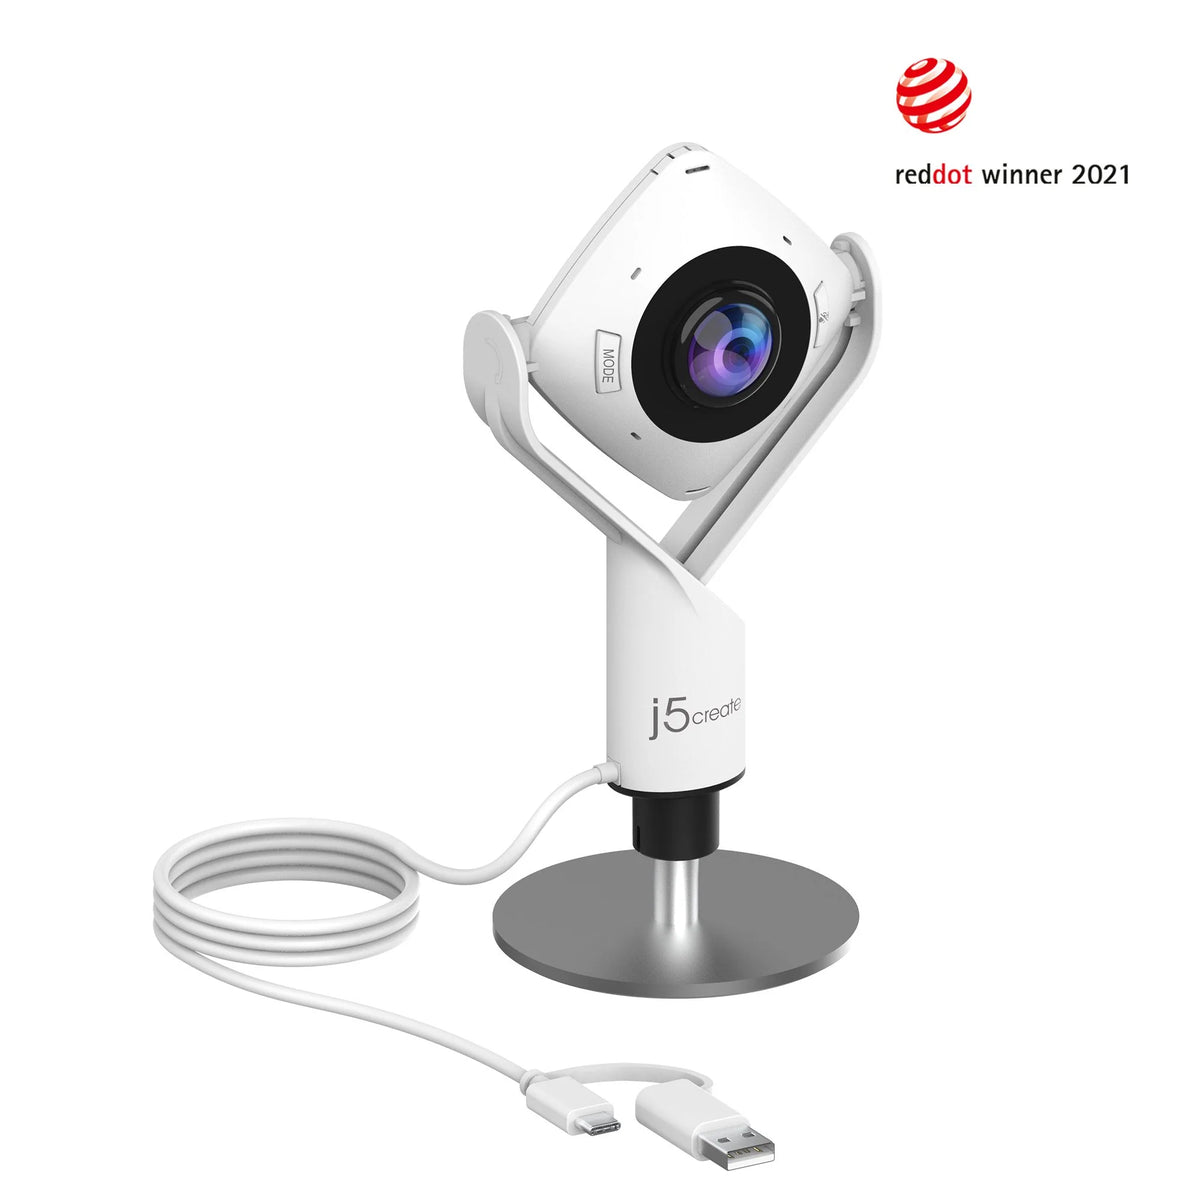 J5create 360 All Around Conference Webcam for Huddle Rooms - Full HD 1080p video playback @ 30 Hz Model: JVCU360 J5CREATE